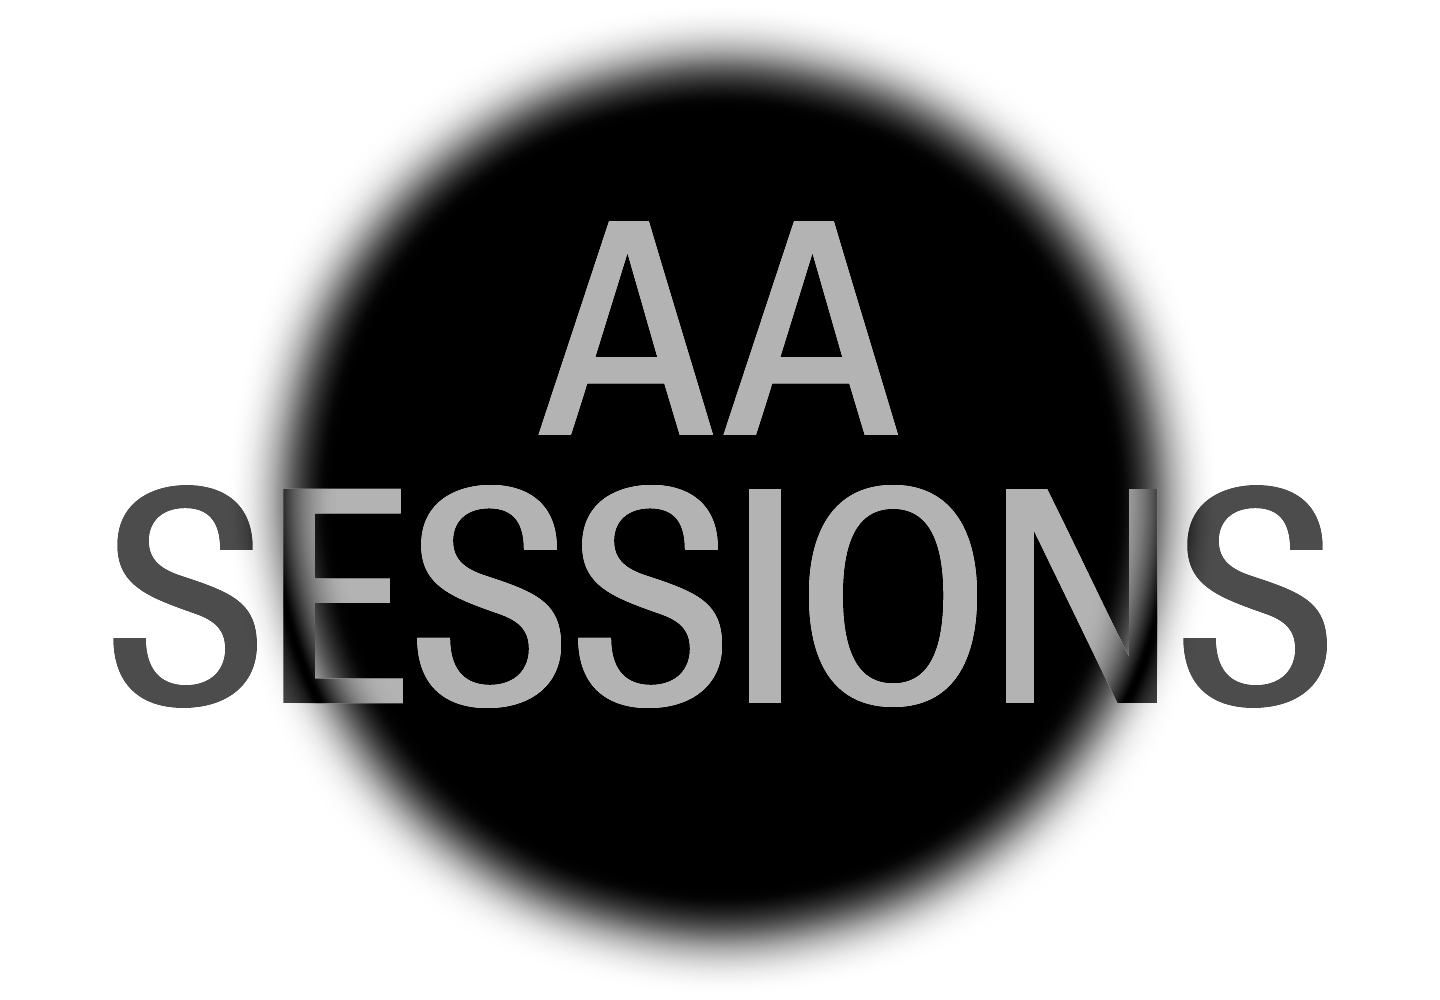 AA Sessions 2020 Announcements eflux